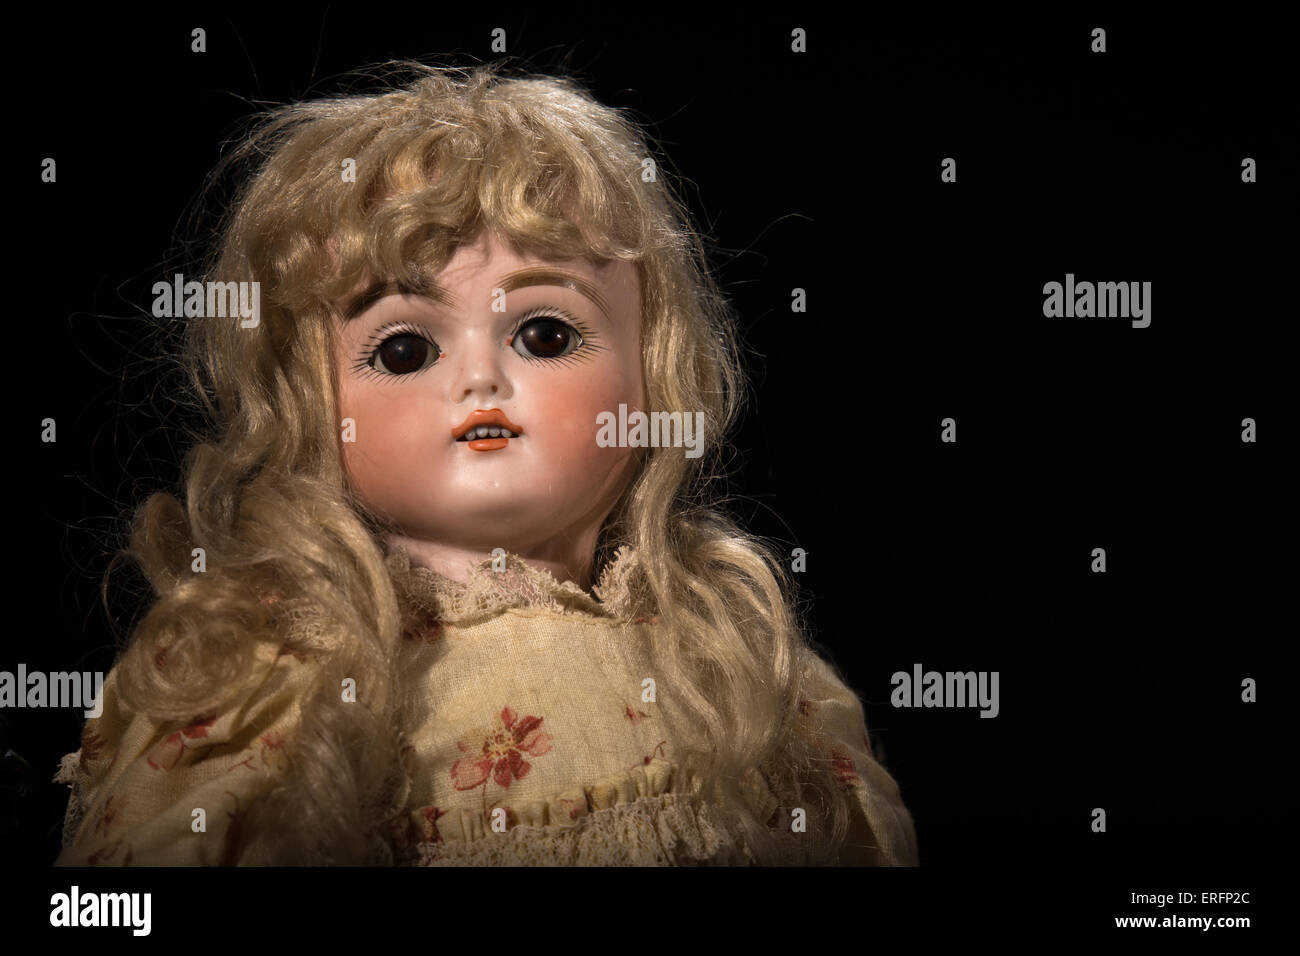 475 Bisque Doll Stock Photos, High-Res Pictures, and Images - Getty Images